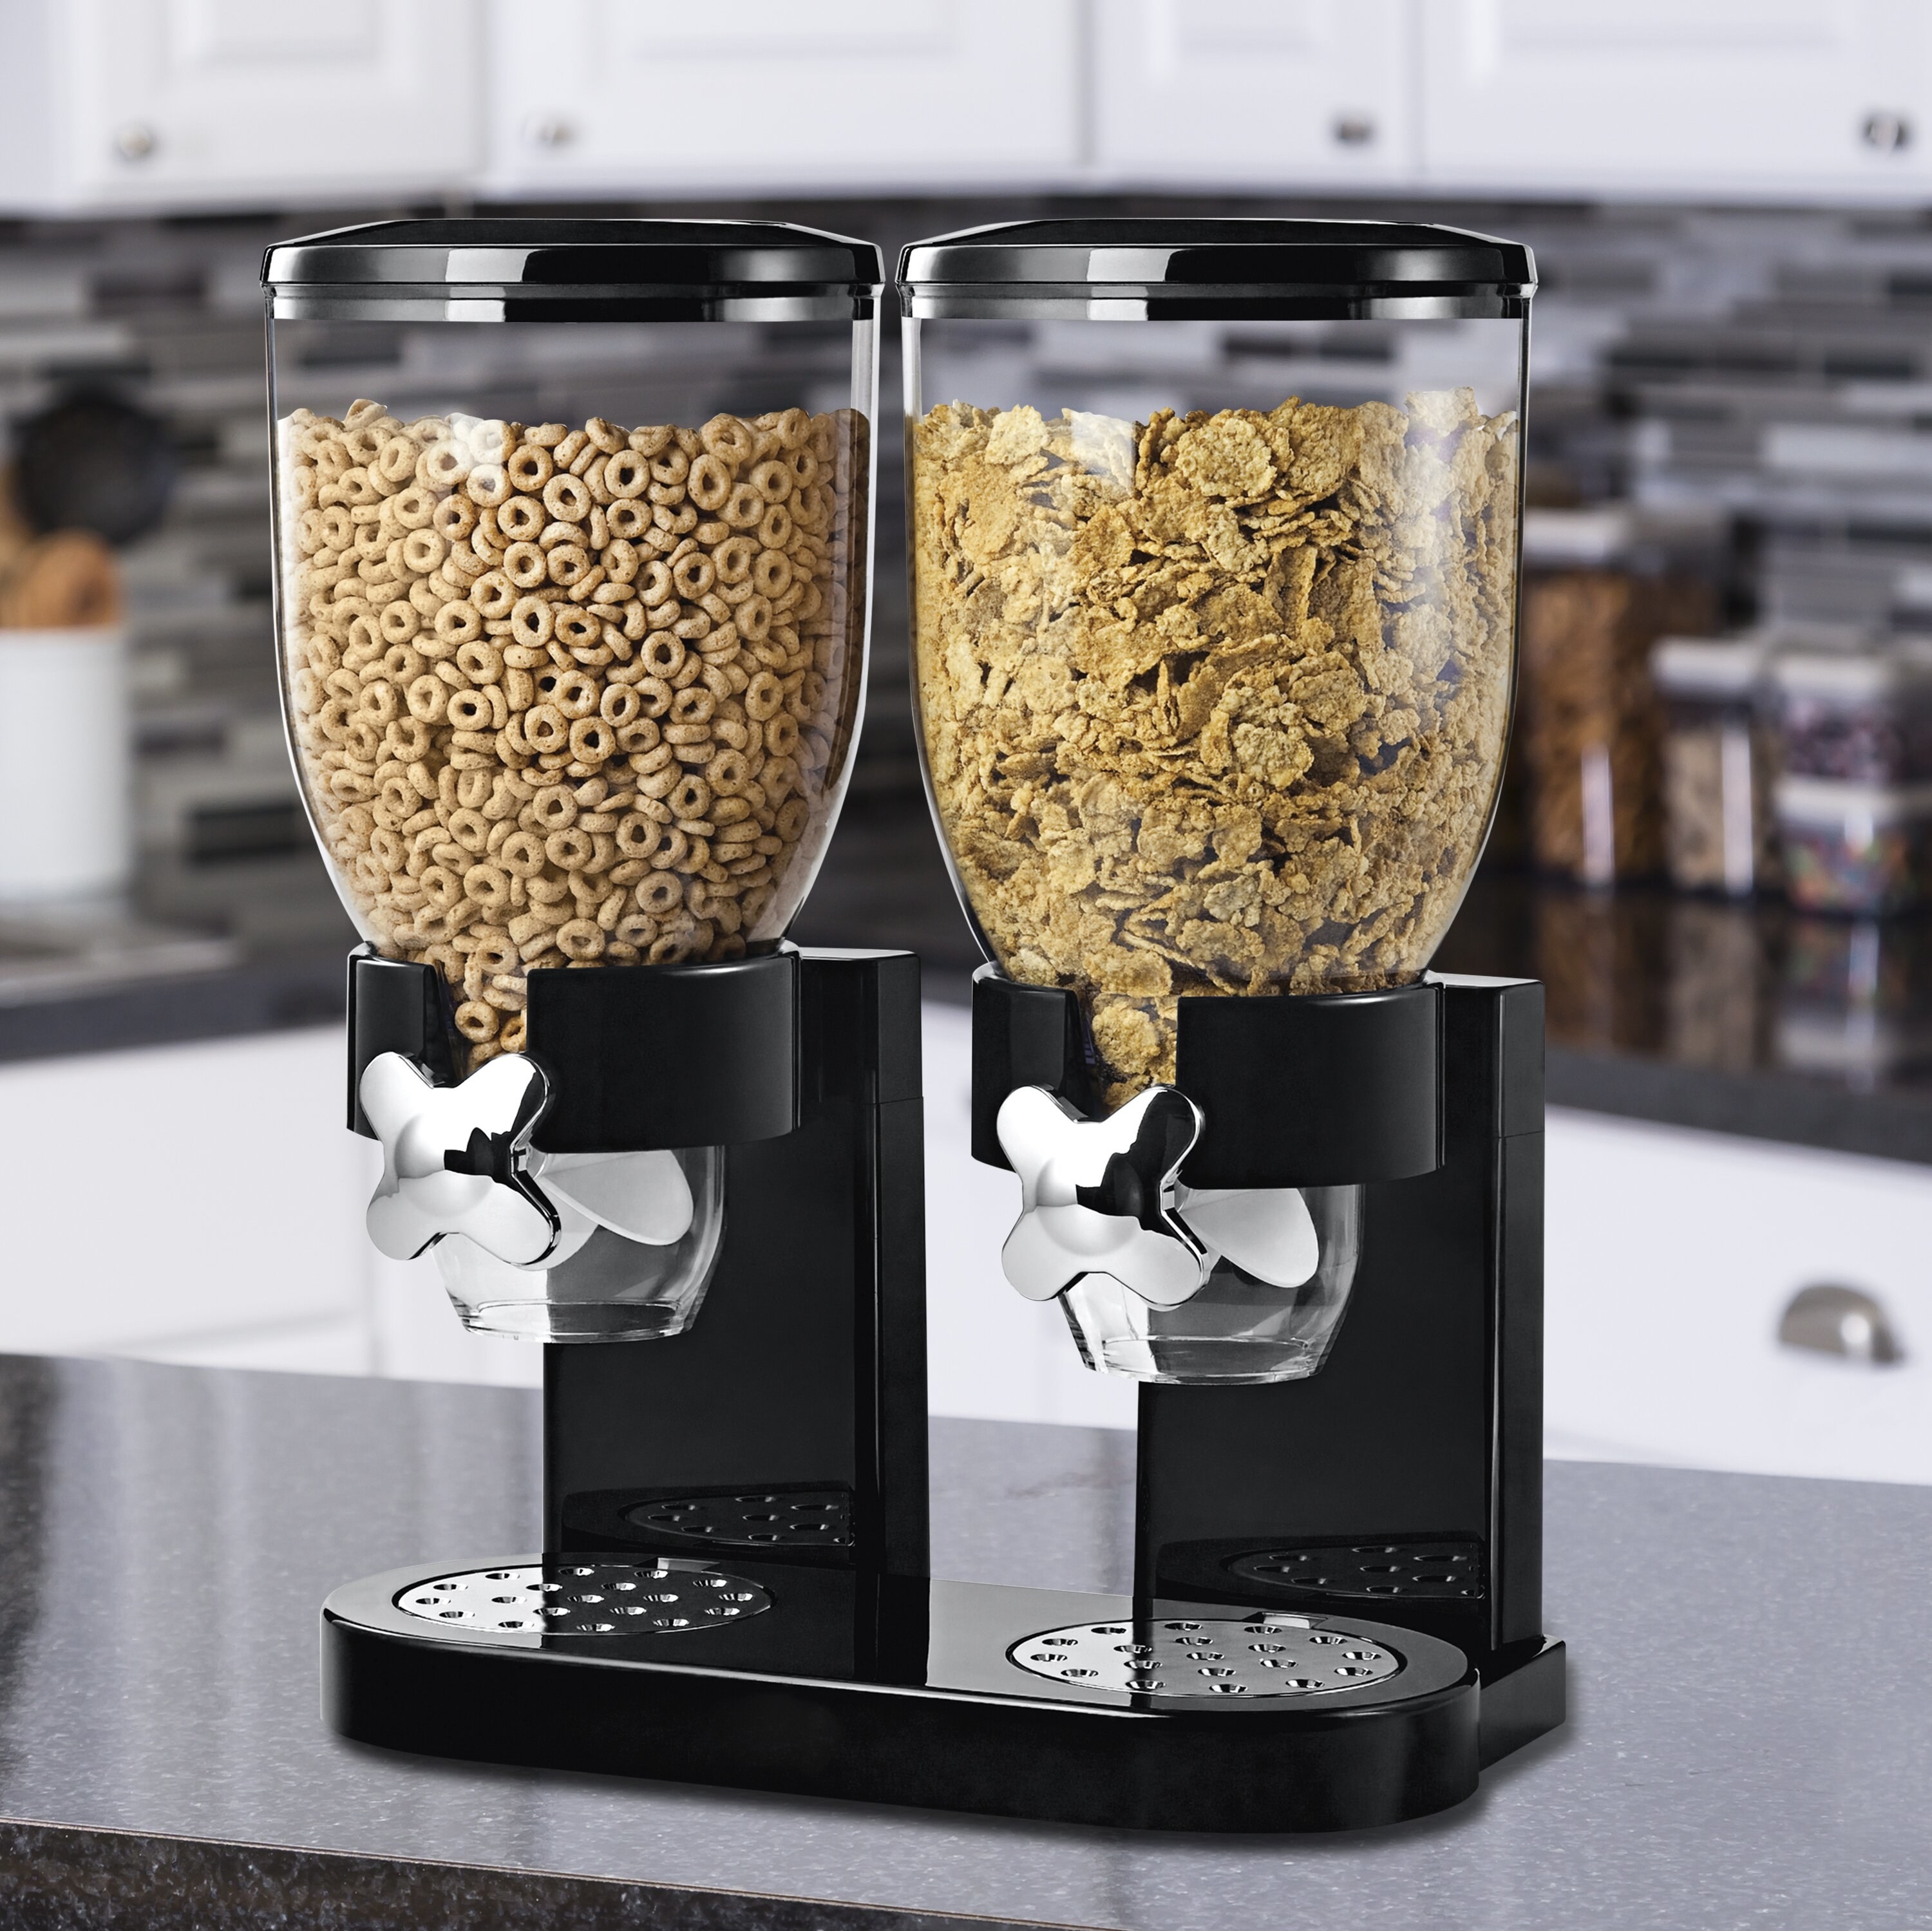 Black double cereal dispenser in kitchen filled with cheerios